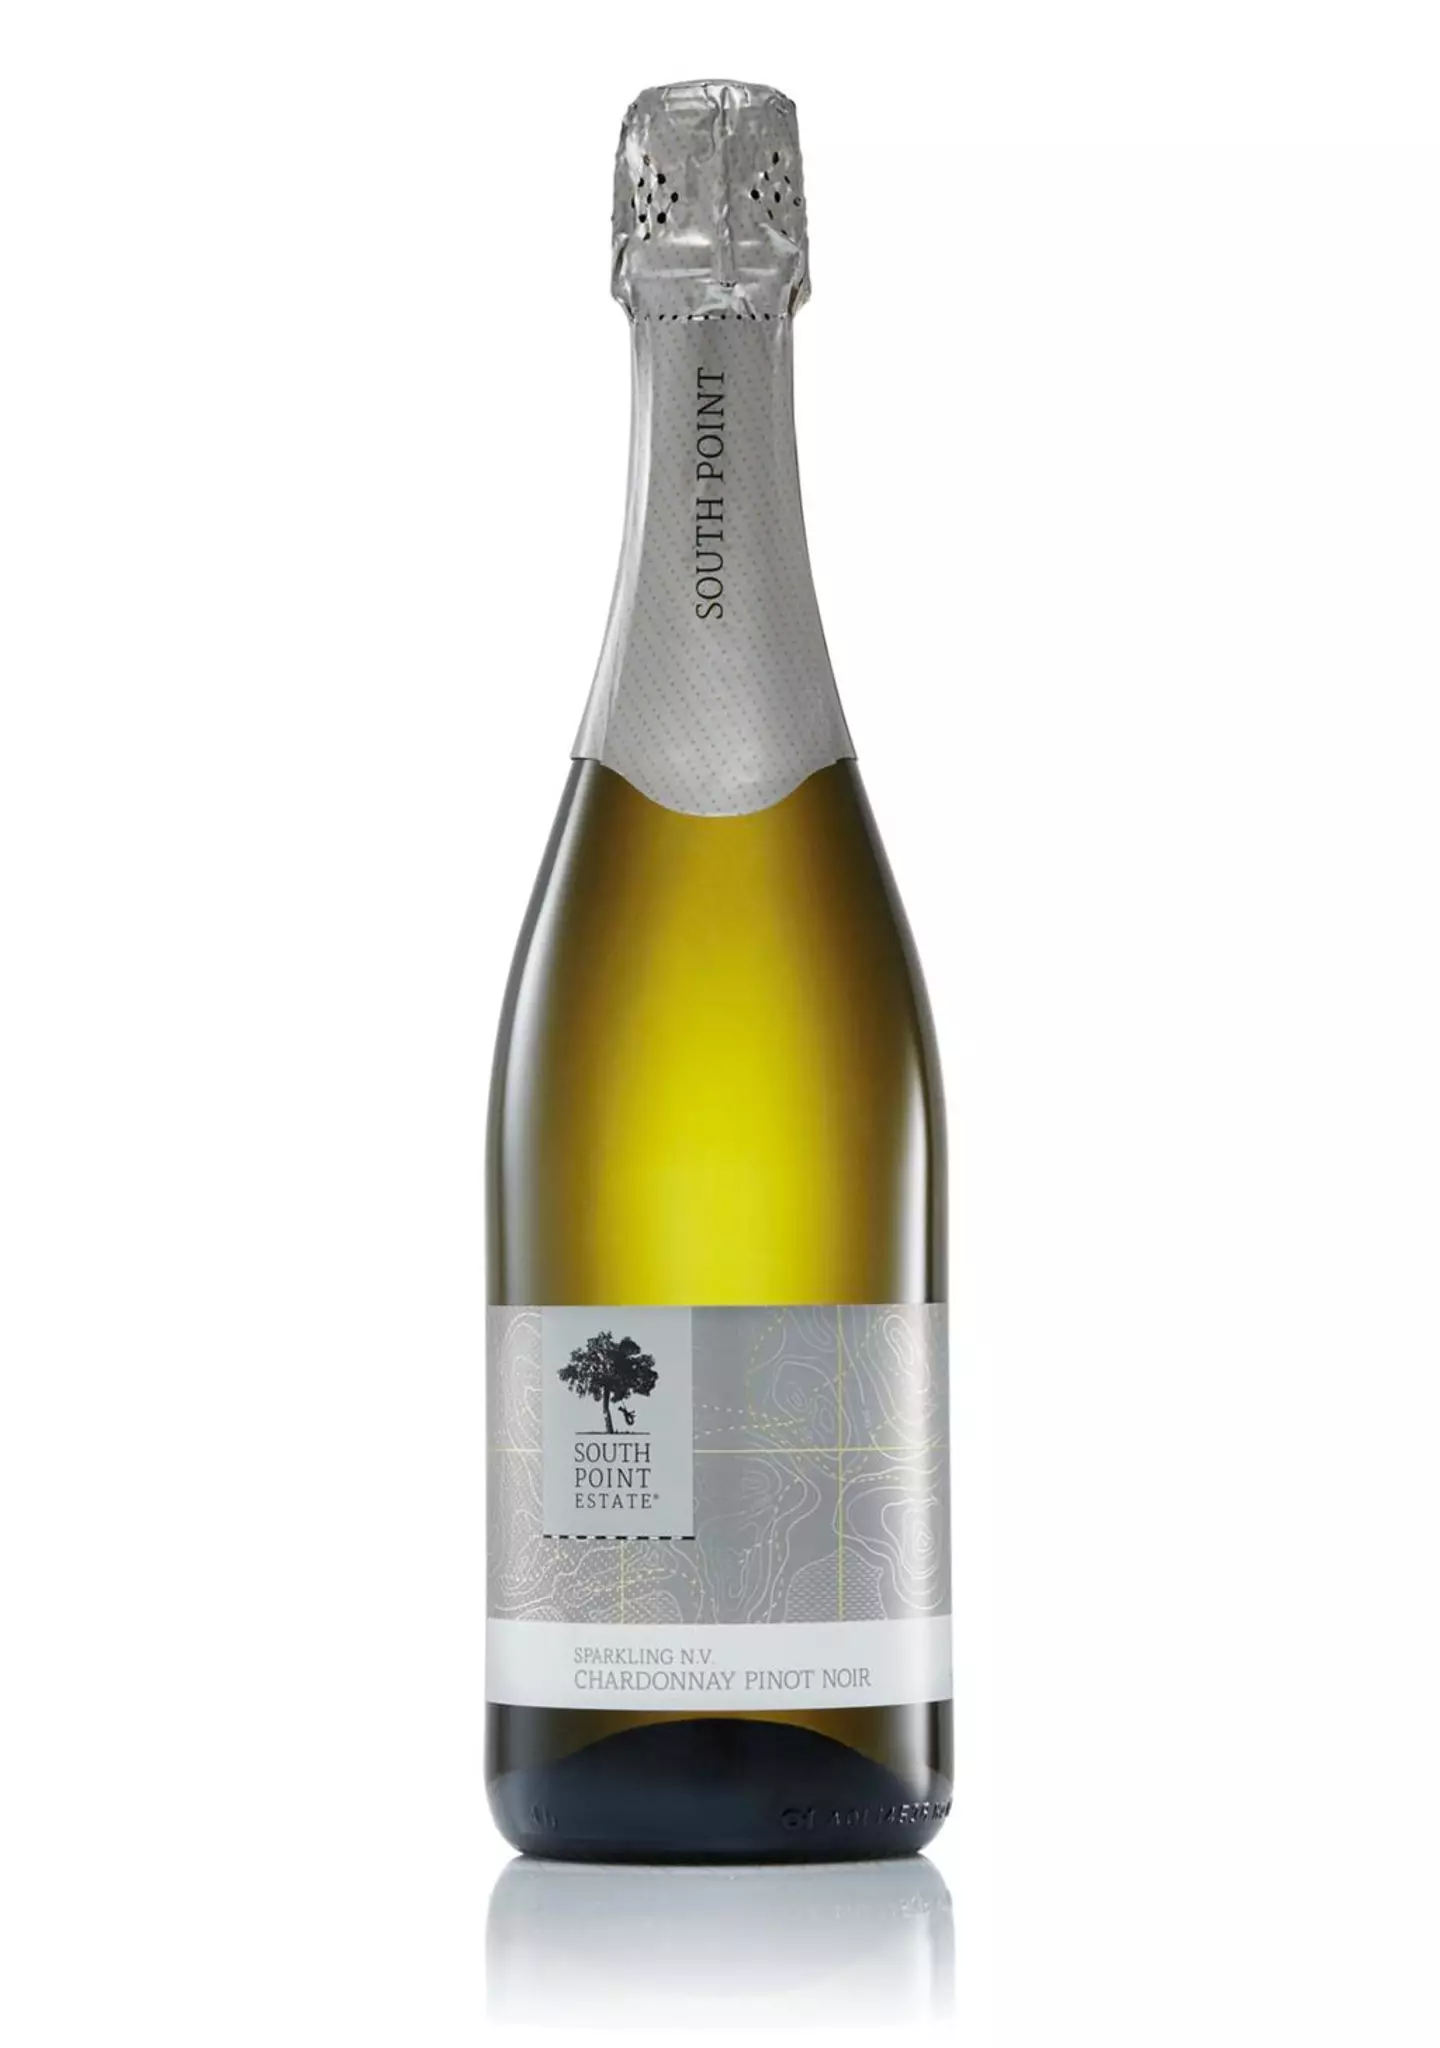 The $4.99 South Point Estate Sparkling Chardonnay Pinot Noir NV took home a Double Gold award.